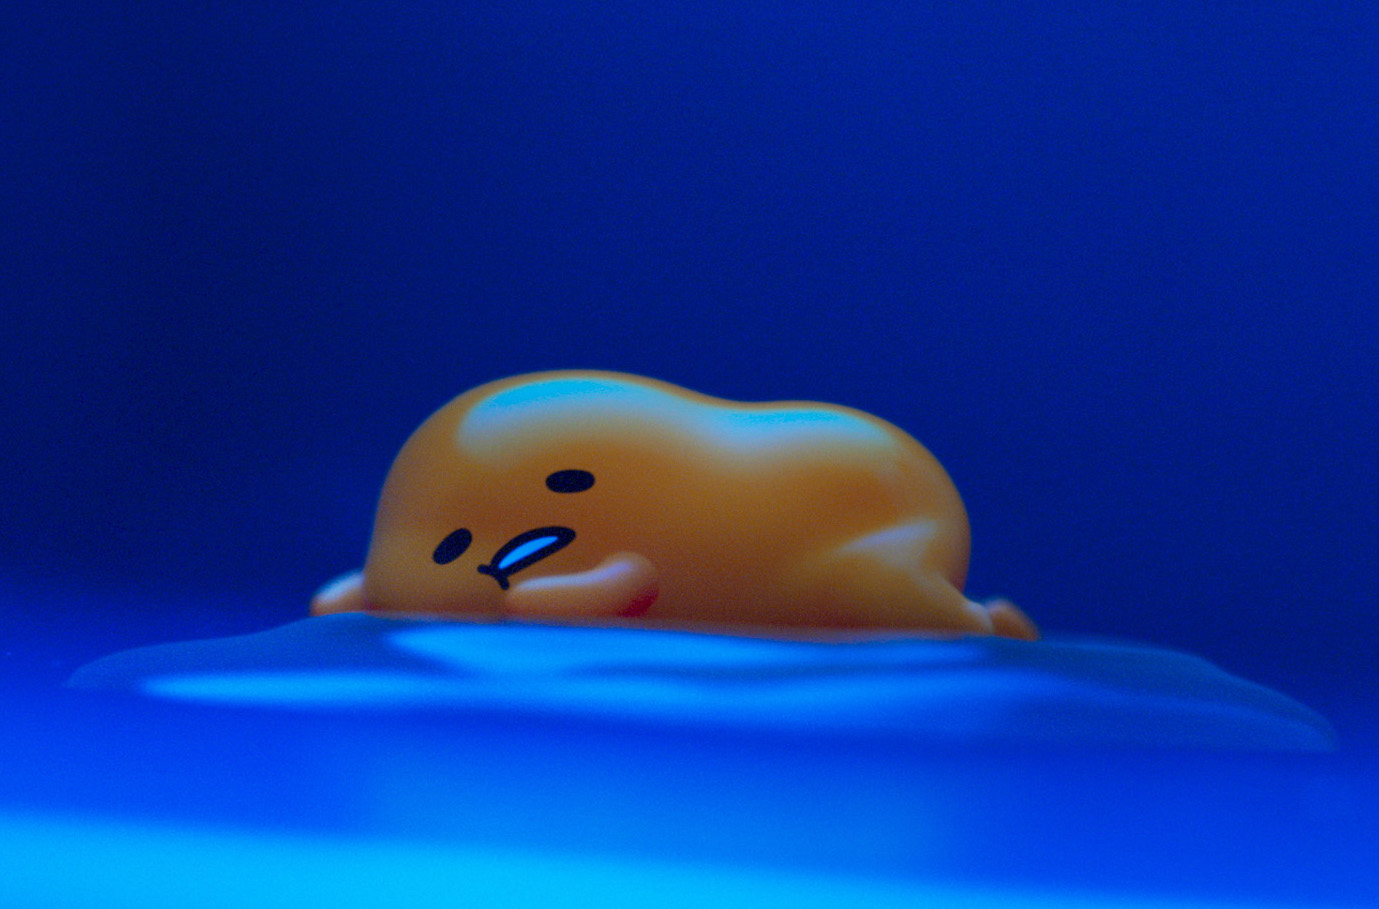 Gudetama: The World’s Laziest (and Most Relatable) Egg